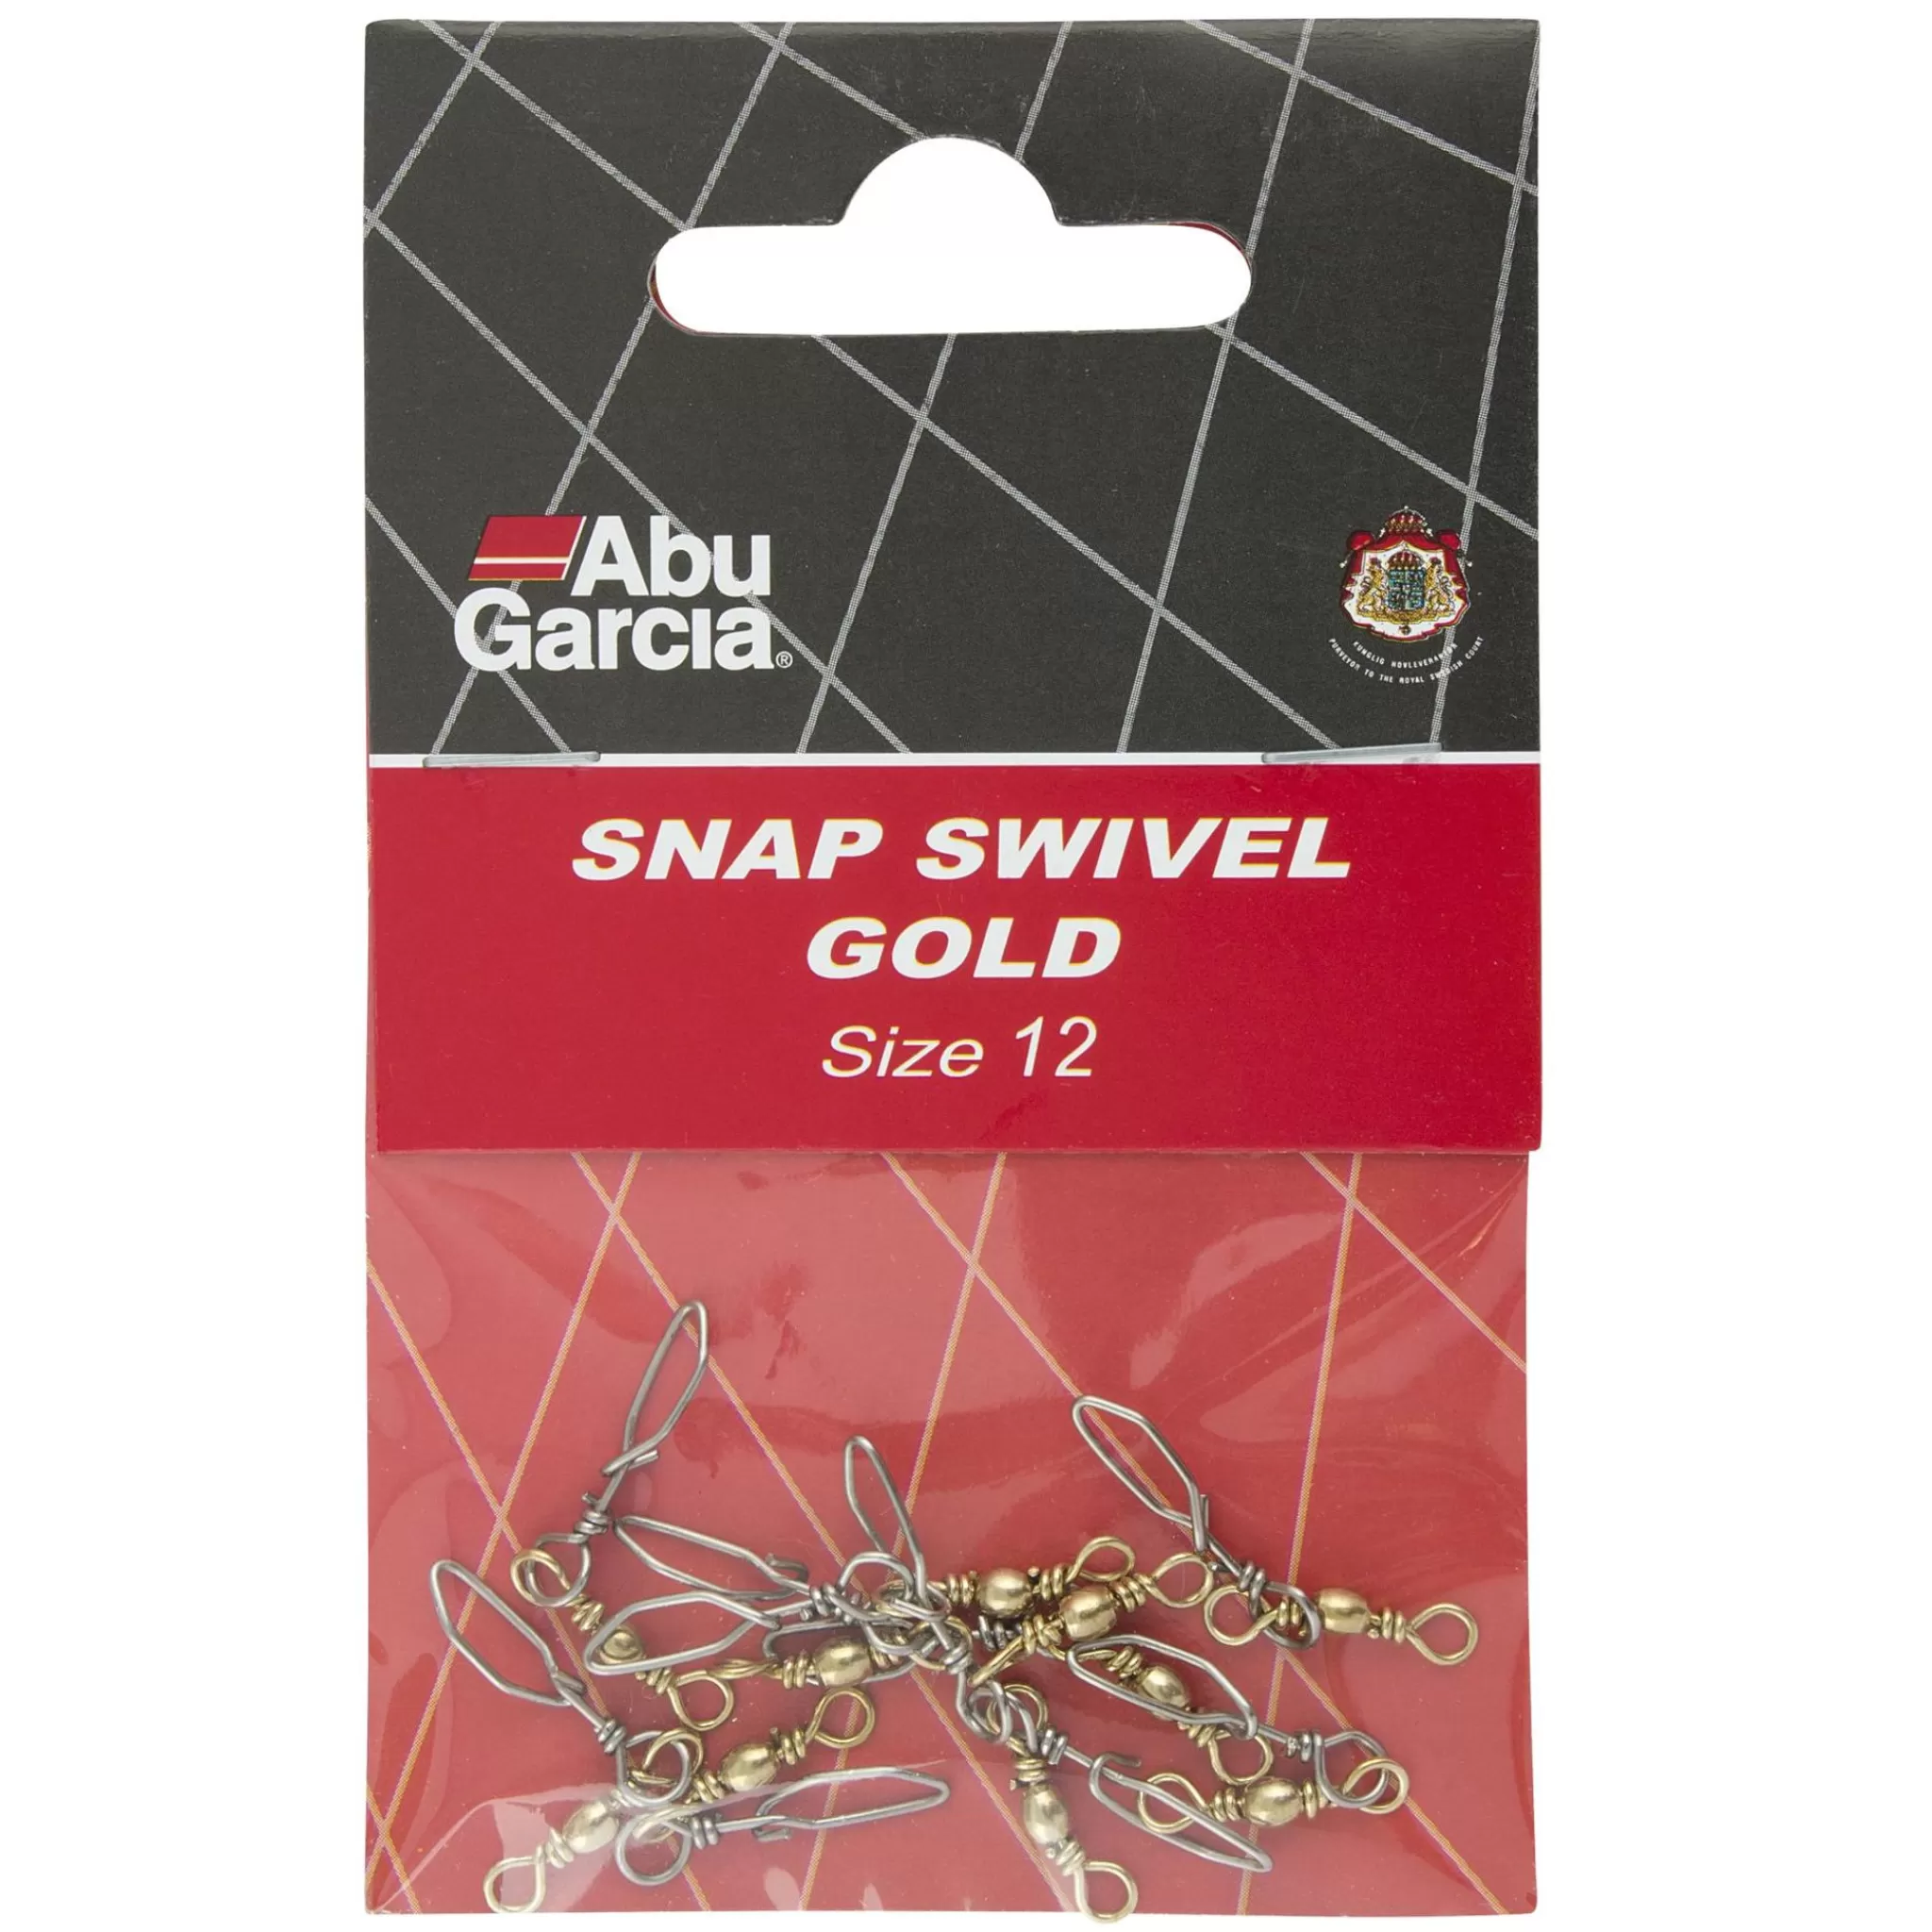 Clearance abu garcia Snap Swivles Gold 1/0, Snappsvivel